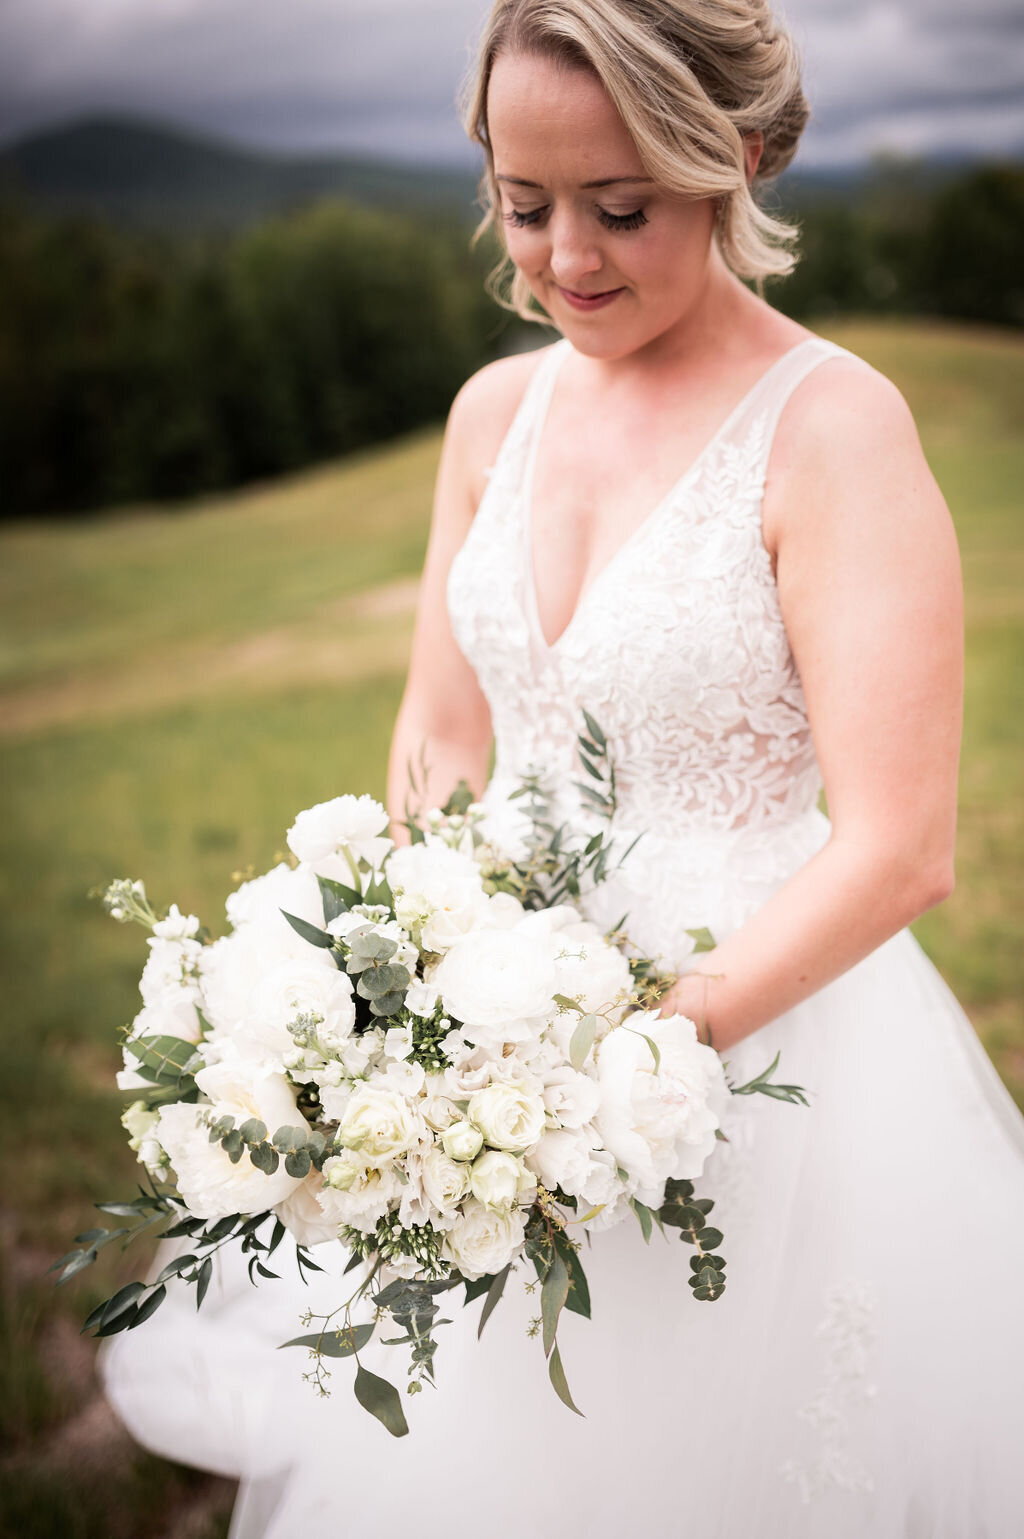 Bride holding her bouquet with white peonies